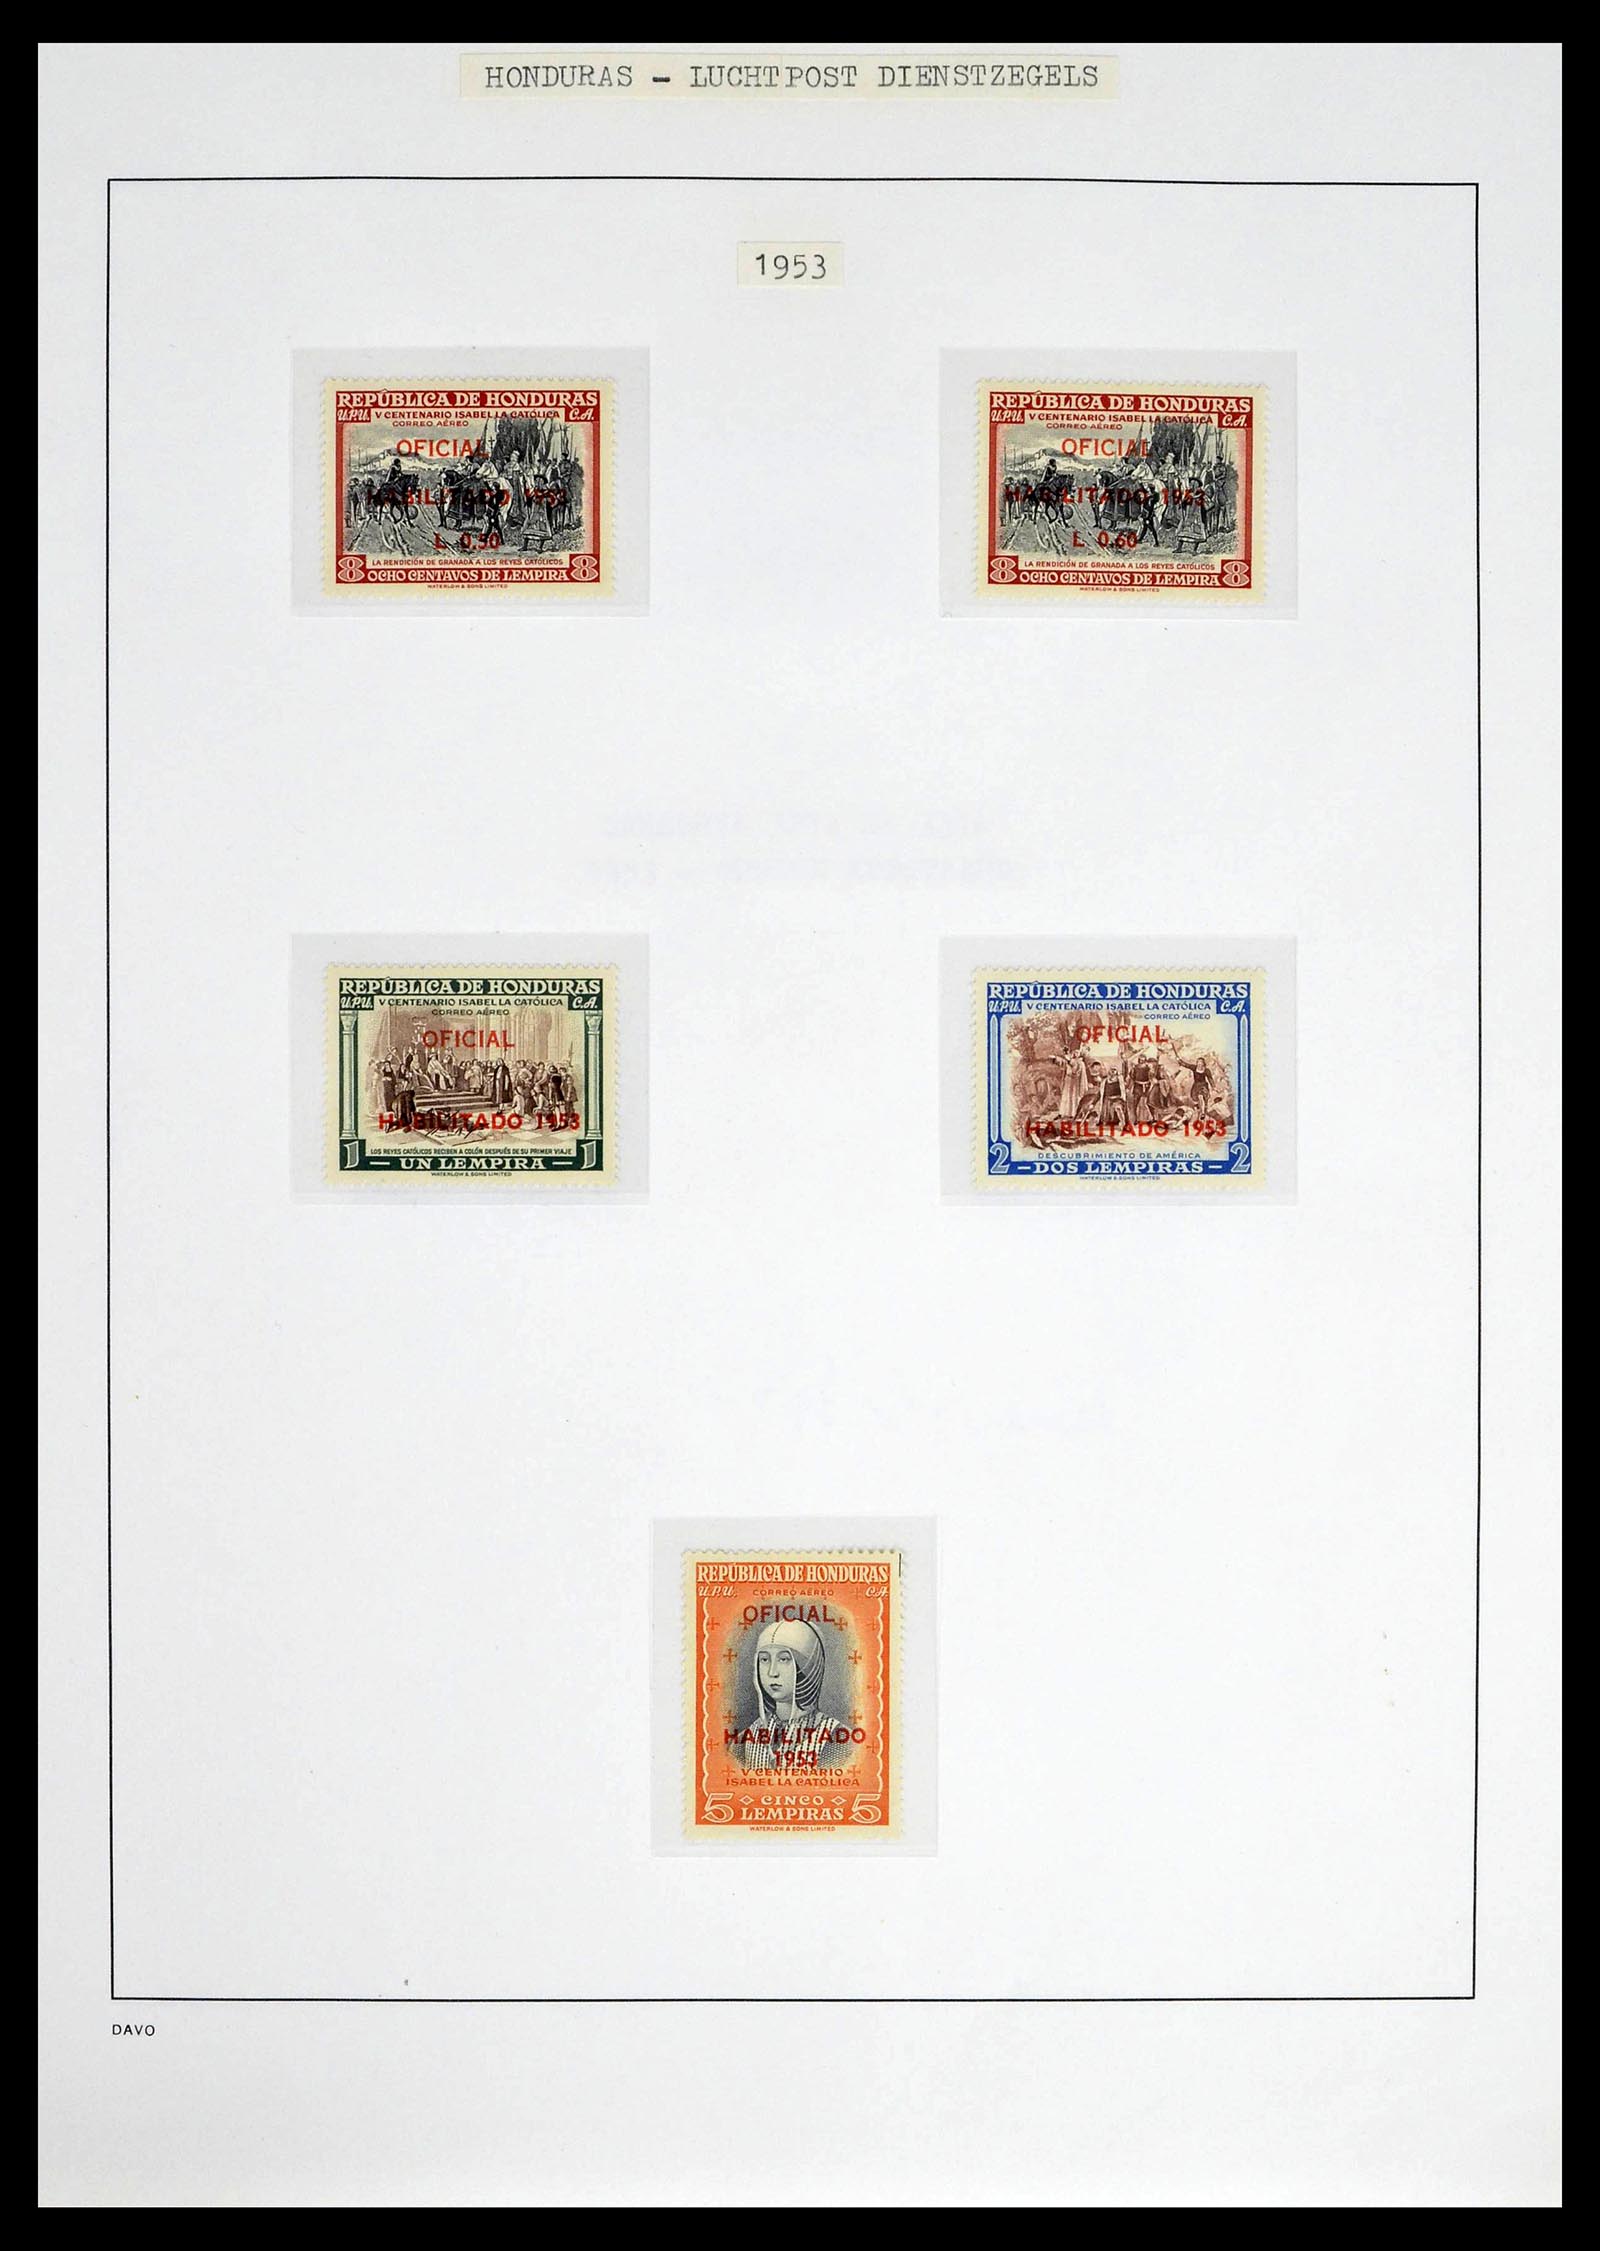 39404 0029 - Stamp collection 39404 Honduras service stamps 1890-1974.